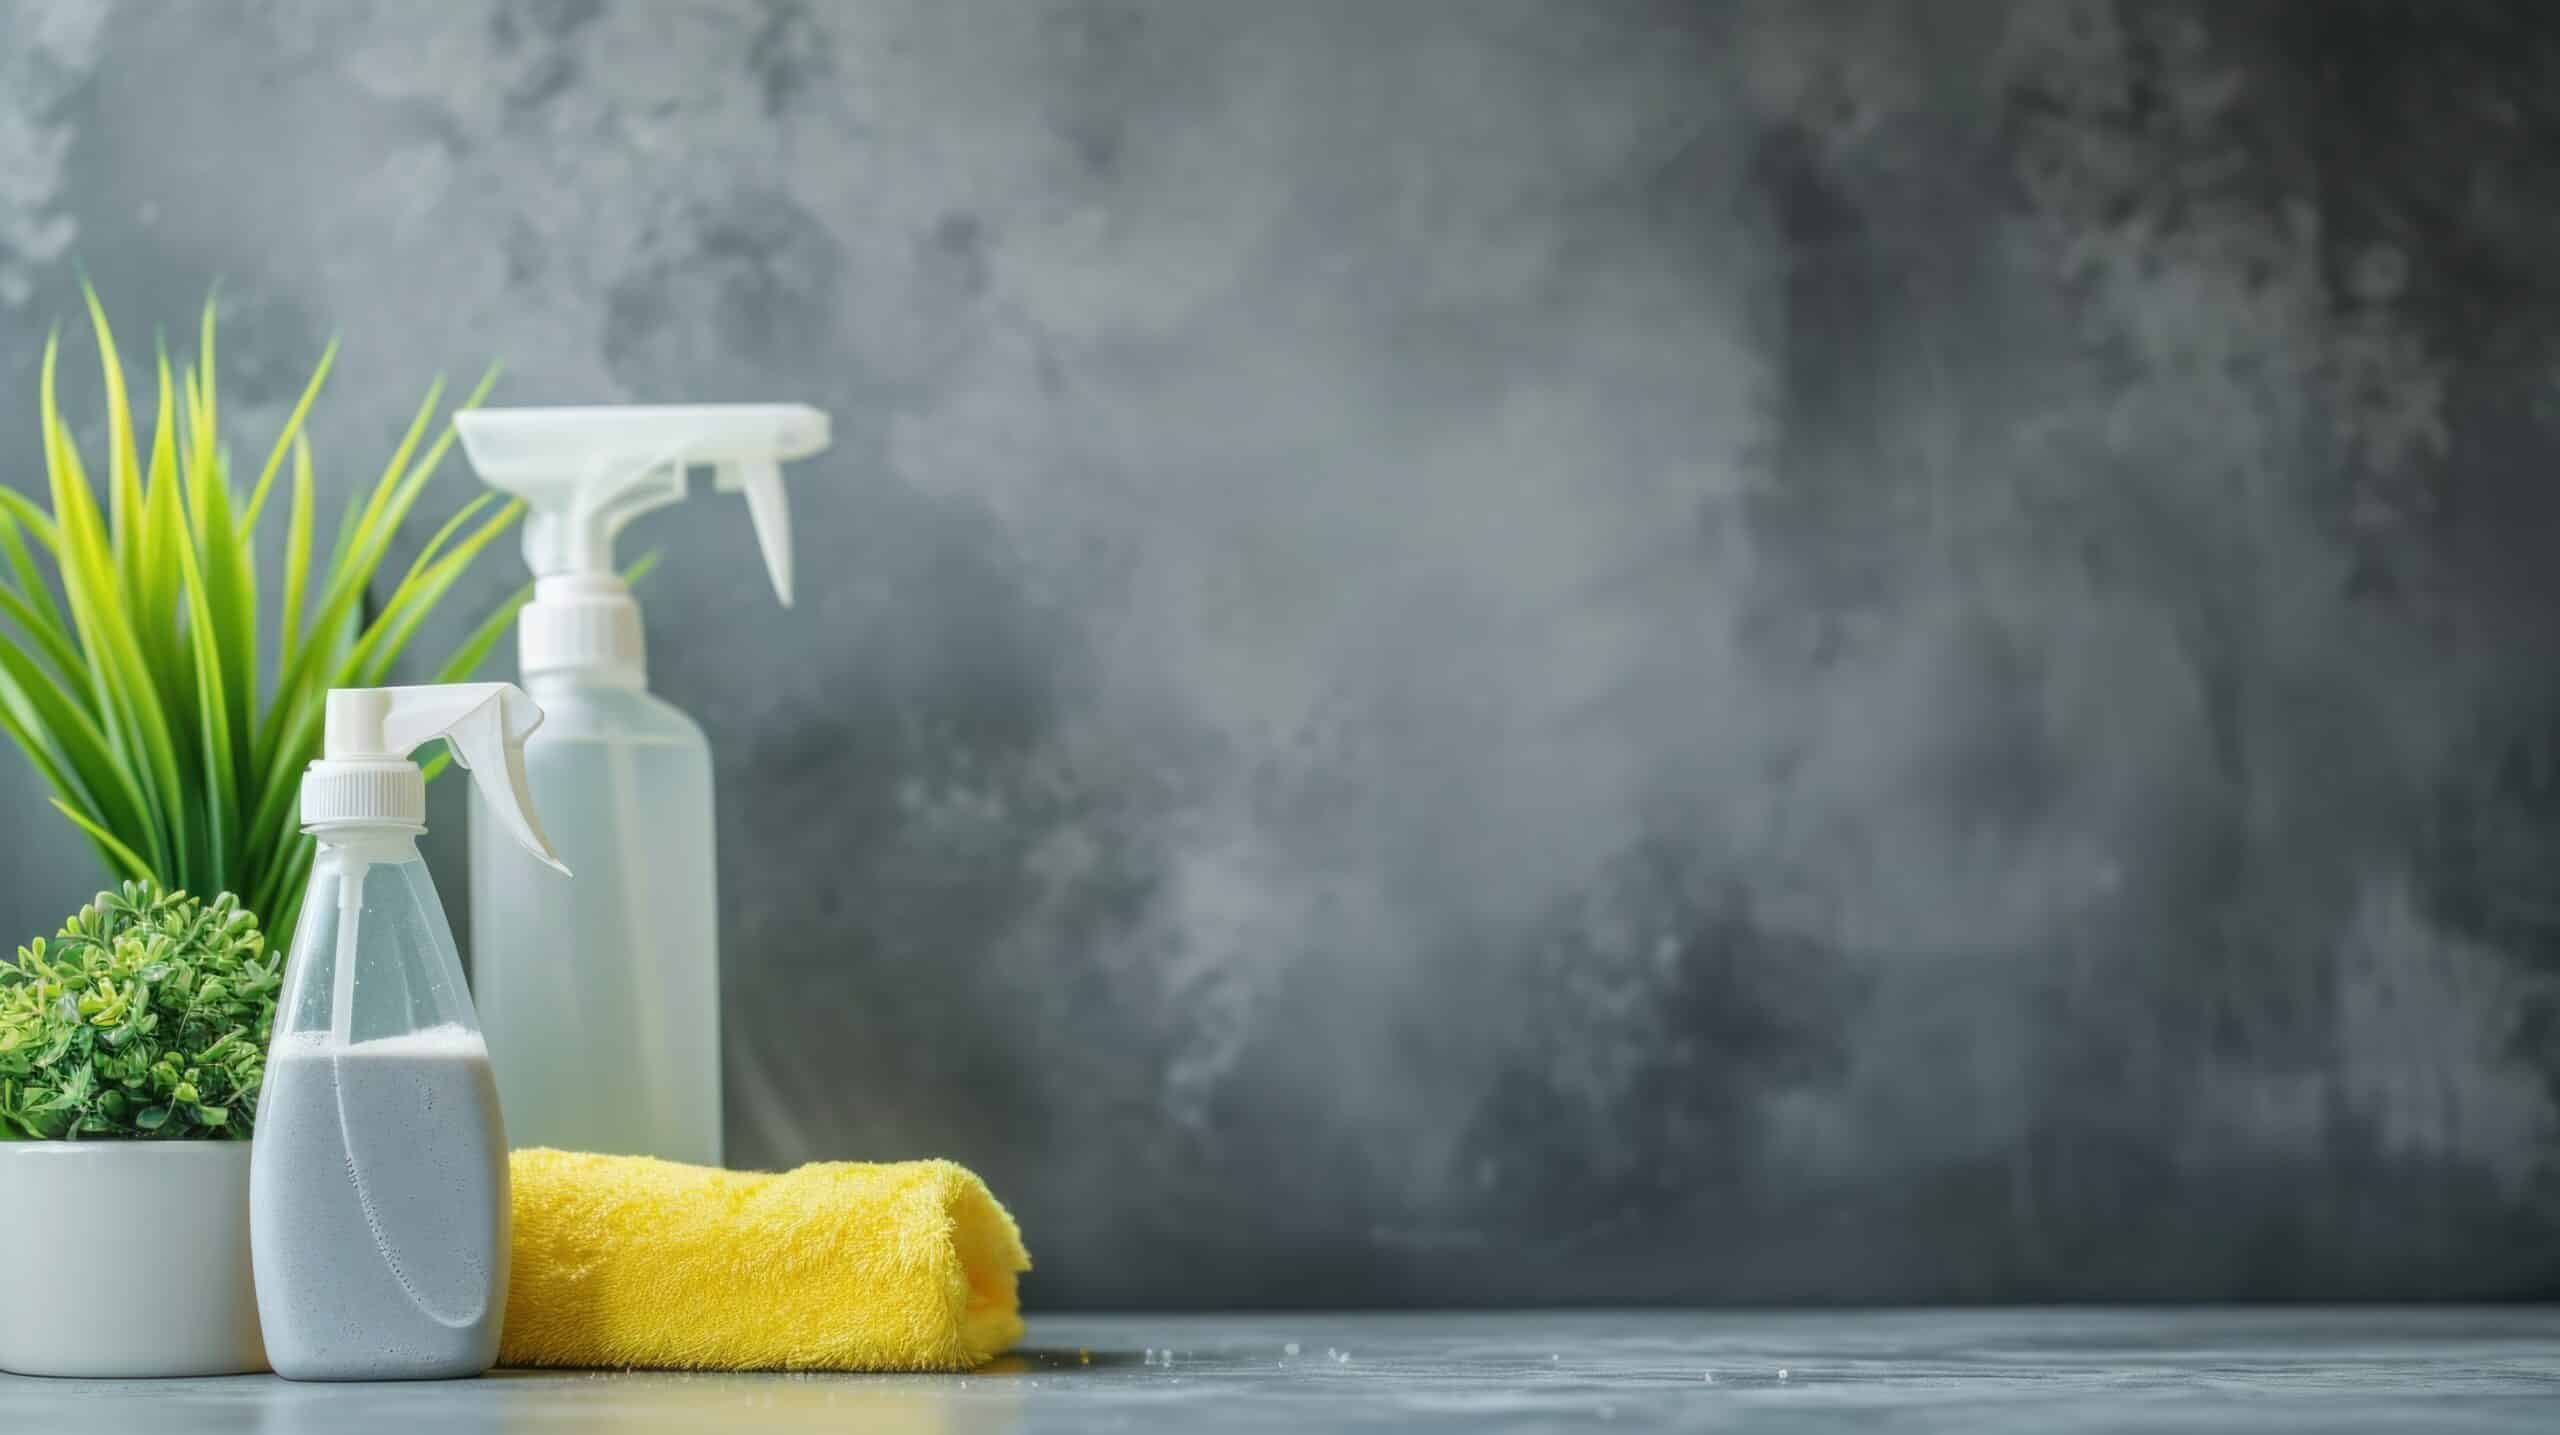 www.appr.com : Do I need to use any chemicals or cleaning solutions with a steam cleaner?